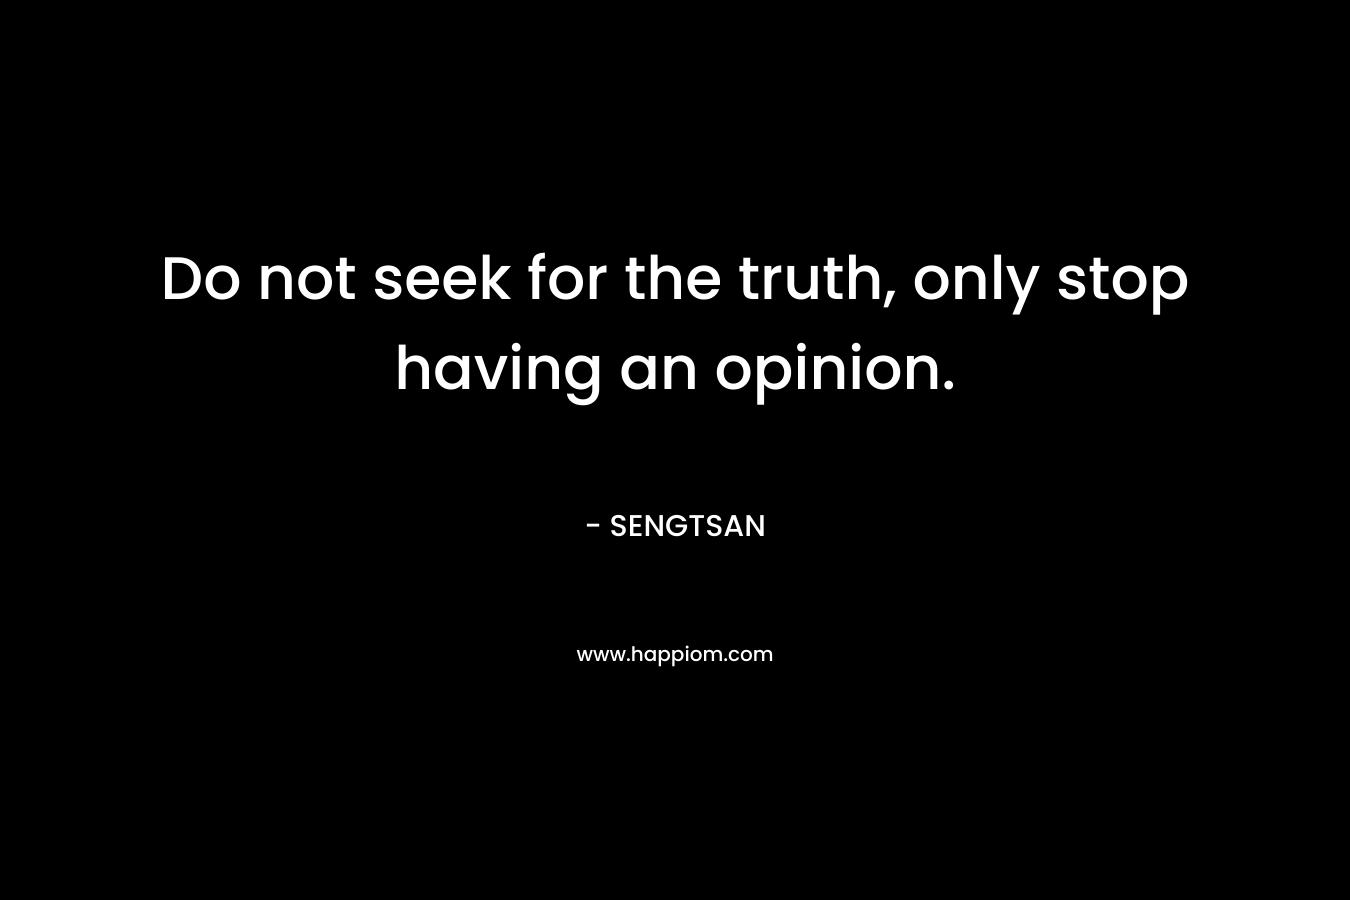 Do not seek for the truth, only stop having an opinion.